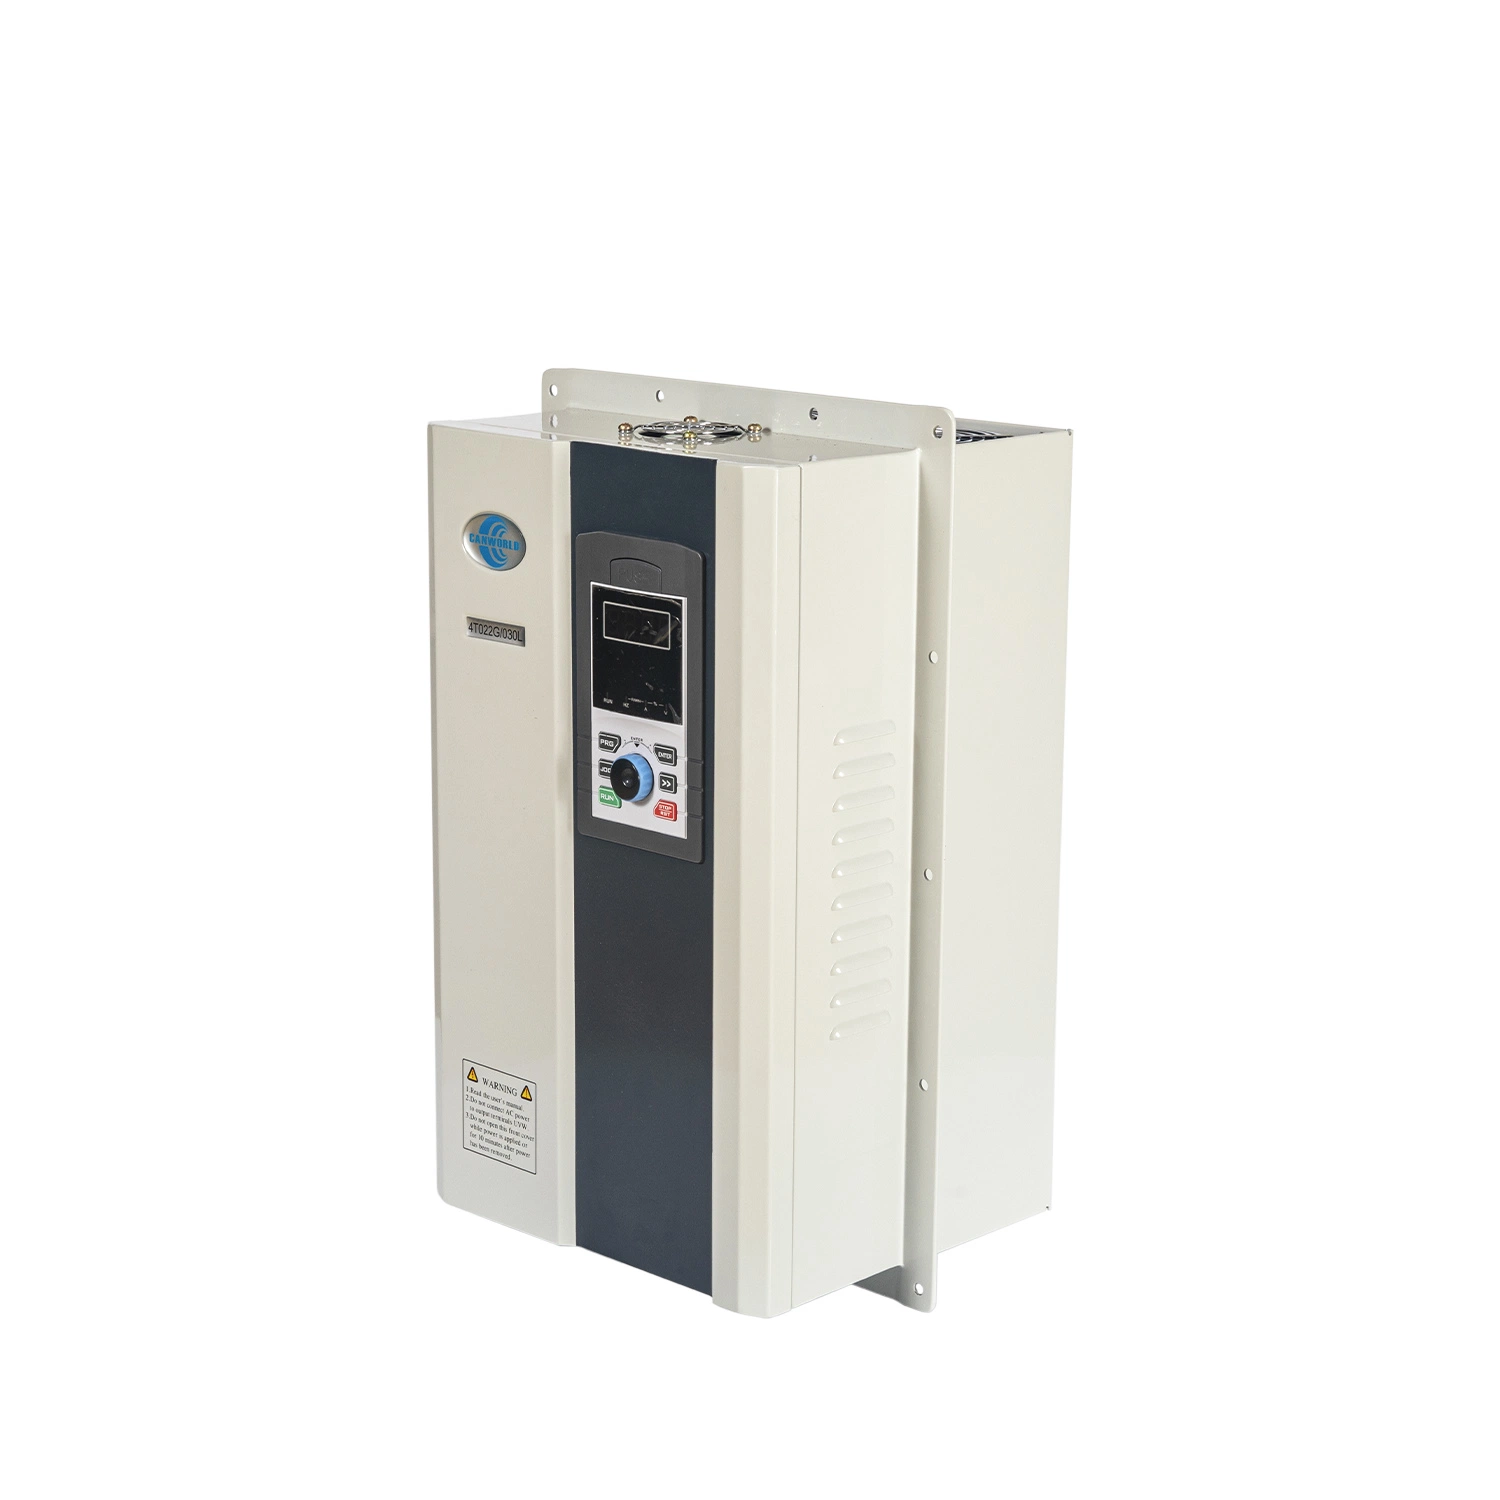 30kw/37kw Variable Frequency Vector VFD Converter AC Drive Frequency Converter Drive/Inverter/Converter